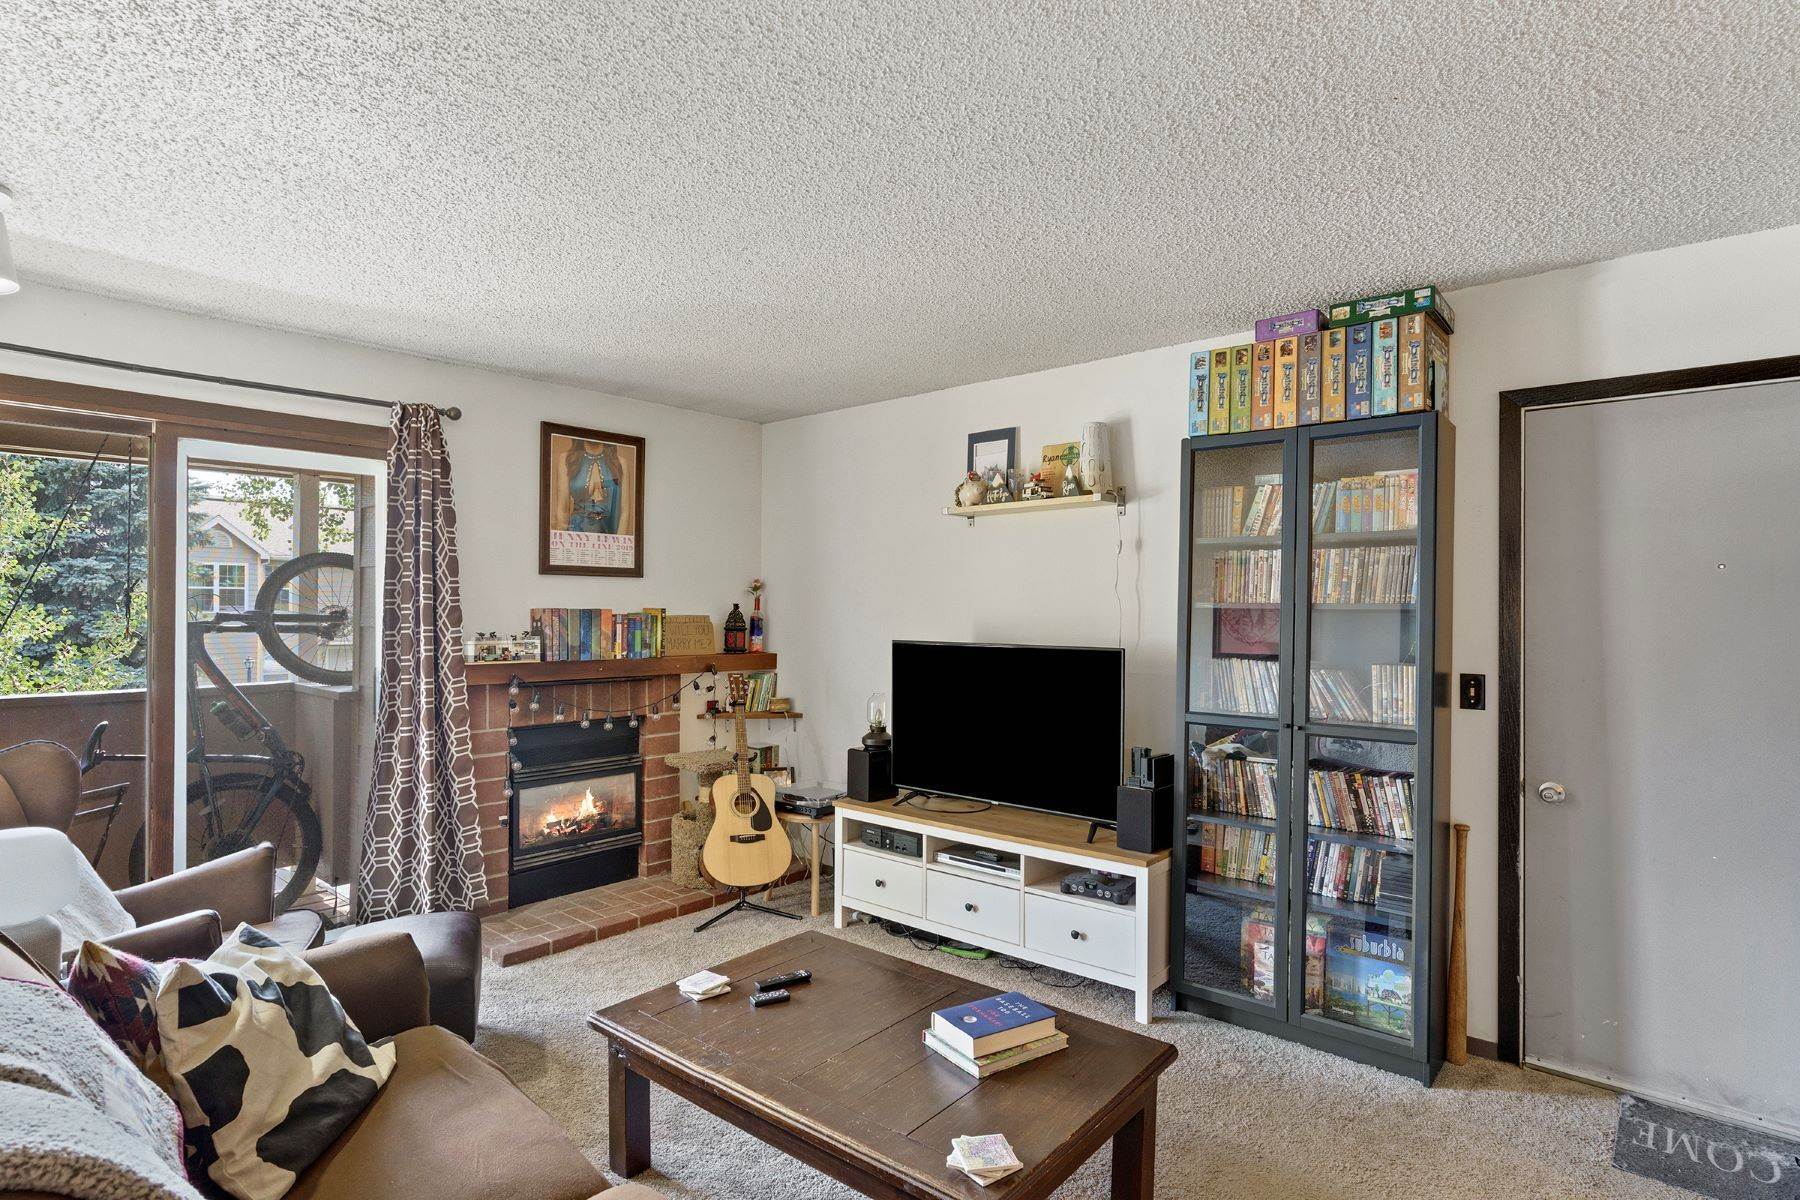 Property for Sale at Perfect Steamboat Condo 1320 Athens Plaza #4 Steamboat Springs, Colorado 80487 United States